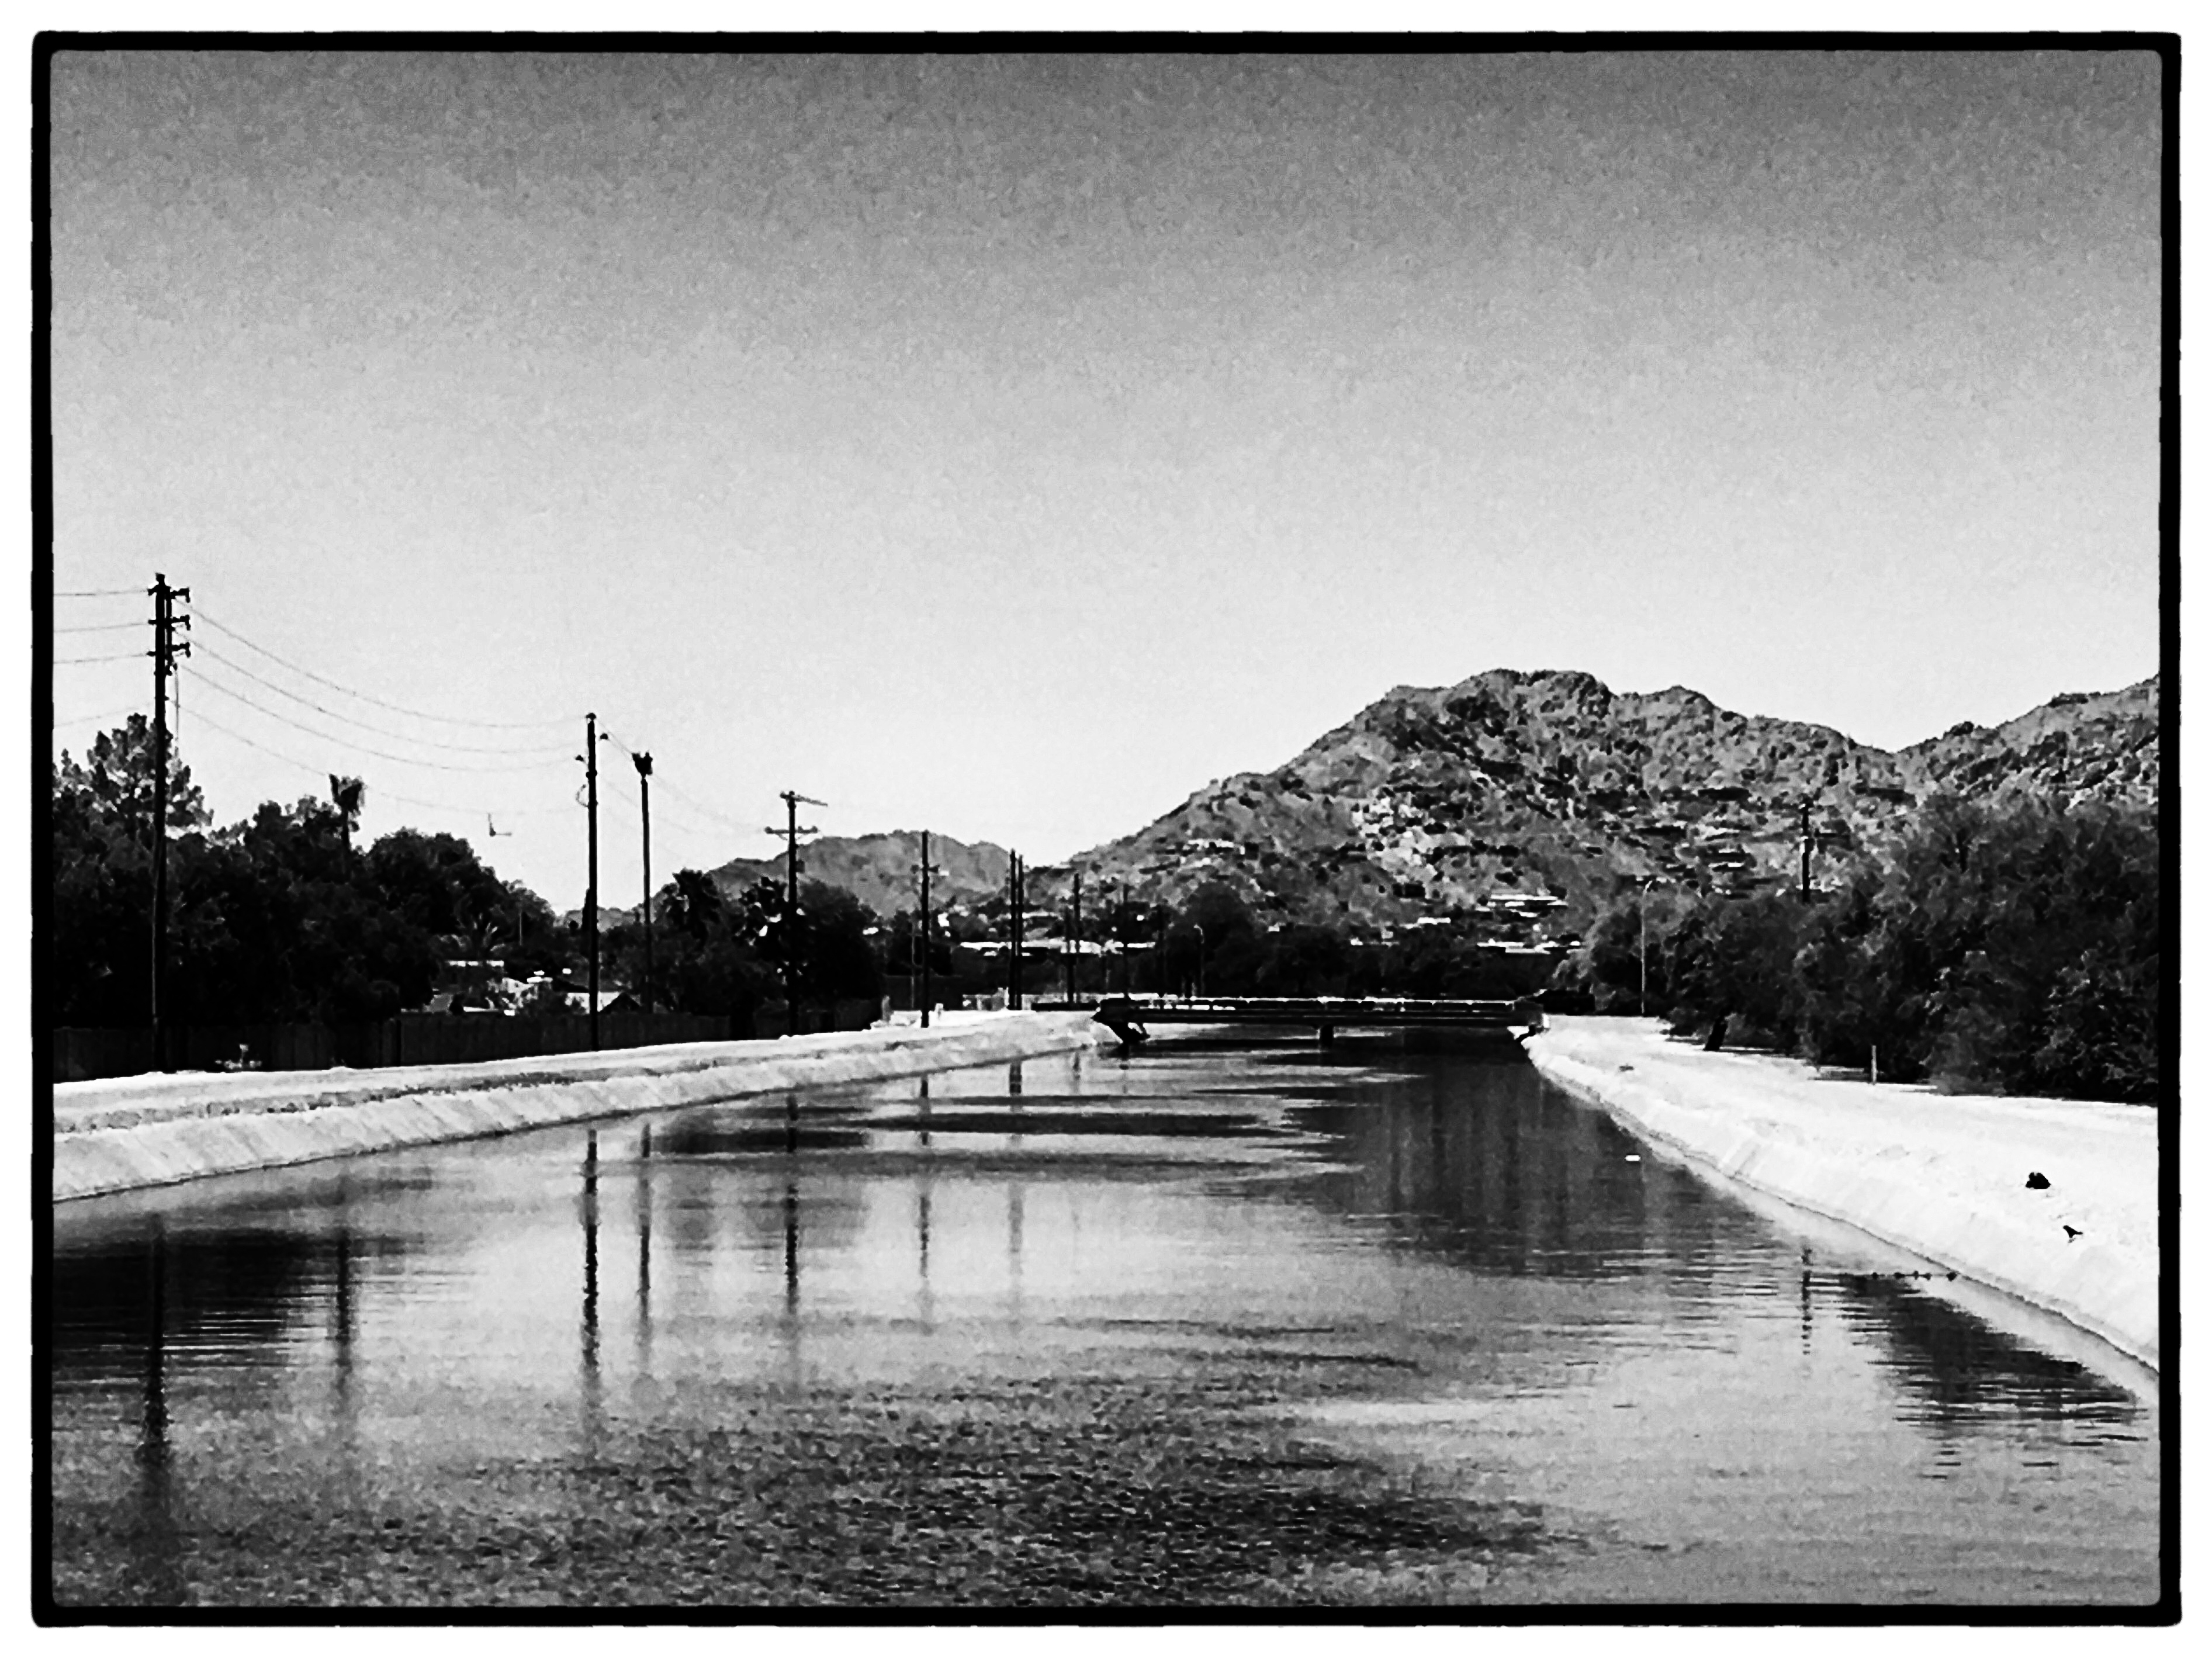 Scottsdale Canal by Jimmy Peggie 2018